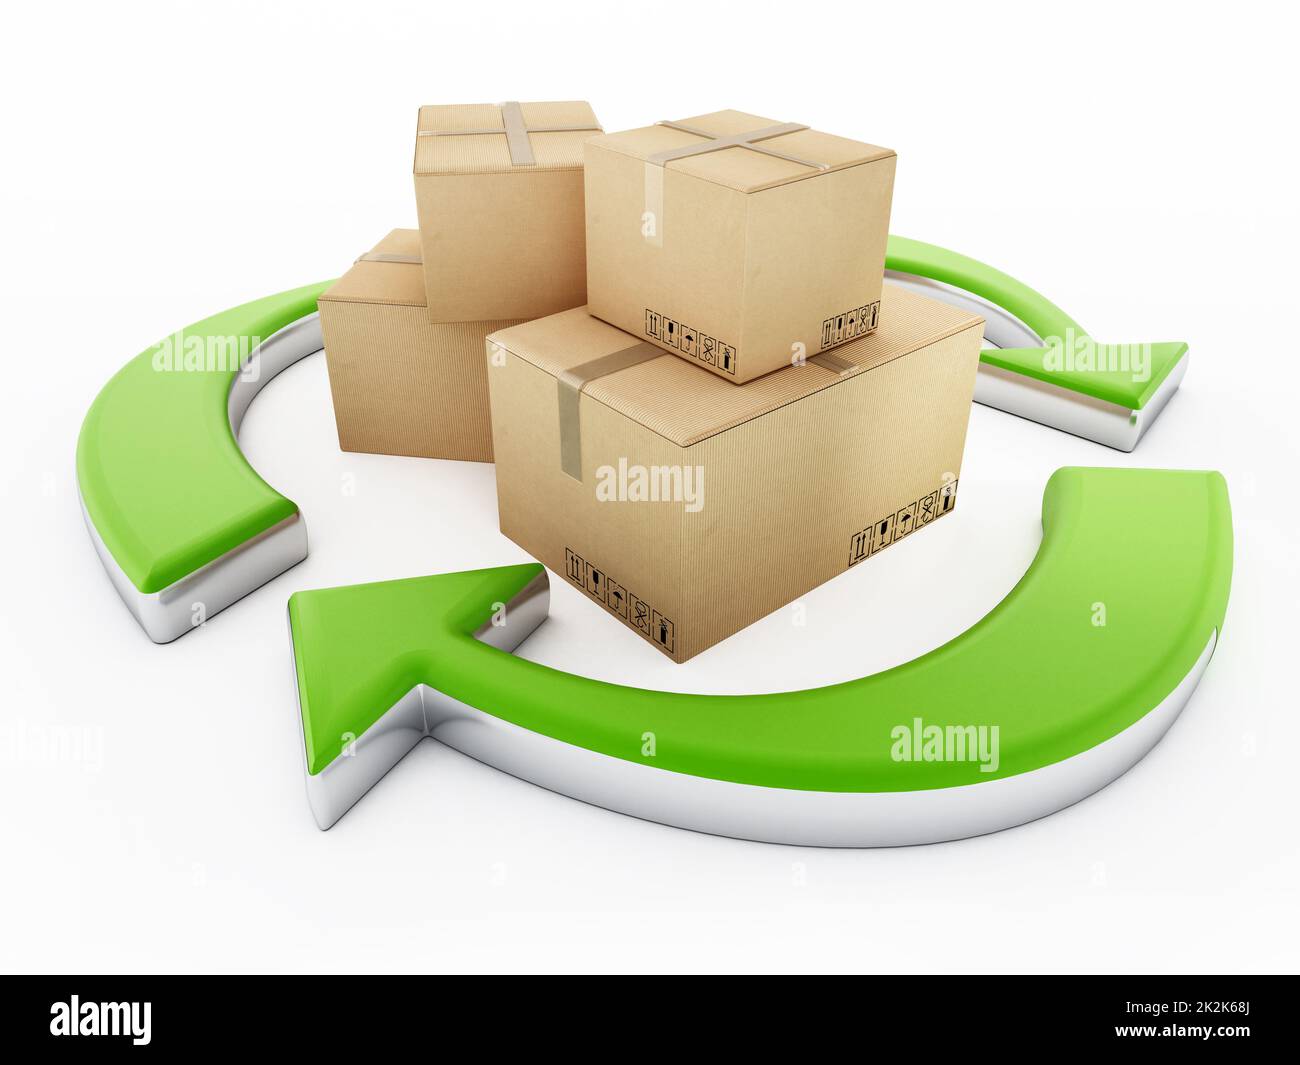 Cardboard box standing among the recycle arrows. 3D illustration Stock Photo